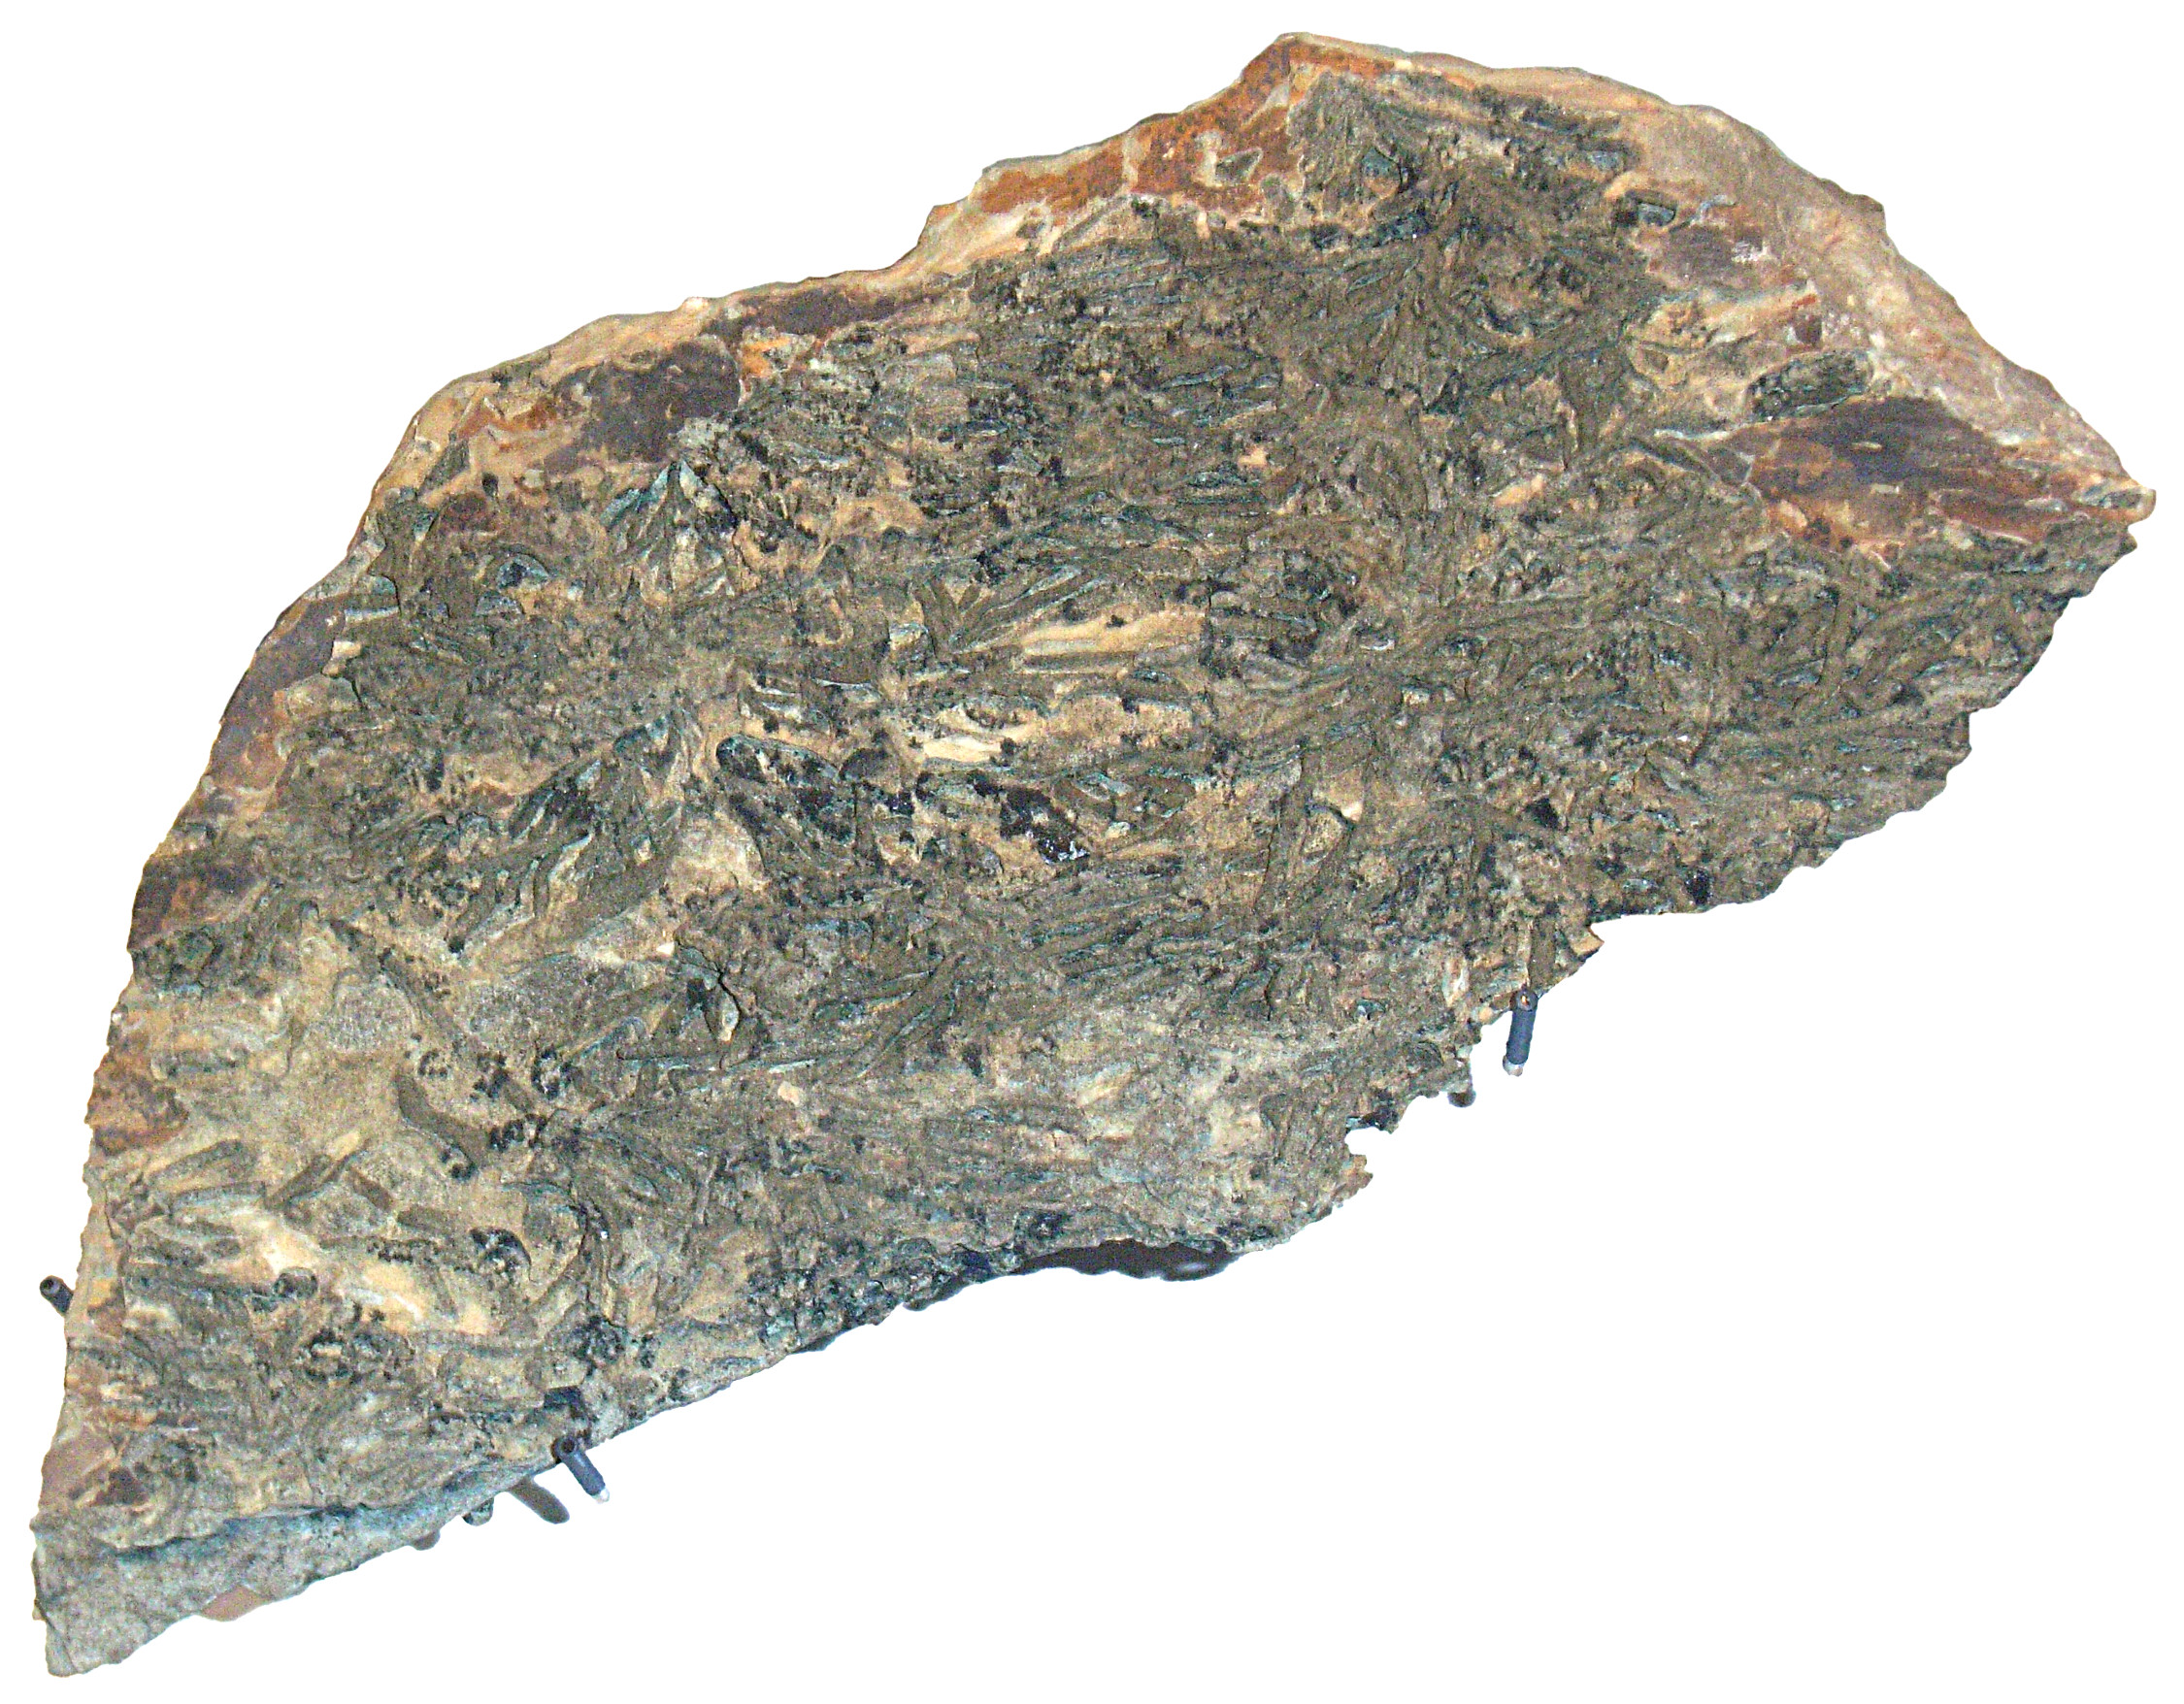 Middle Silurian chondrites